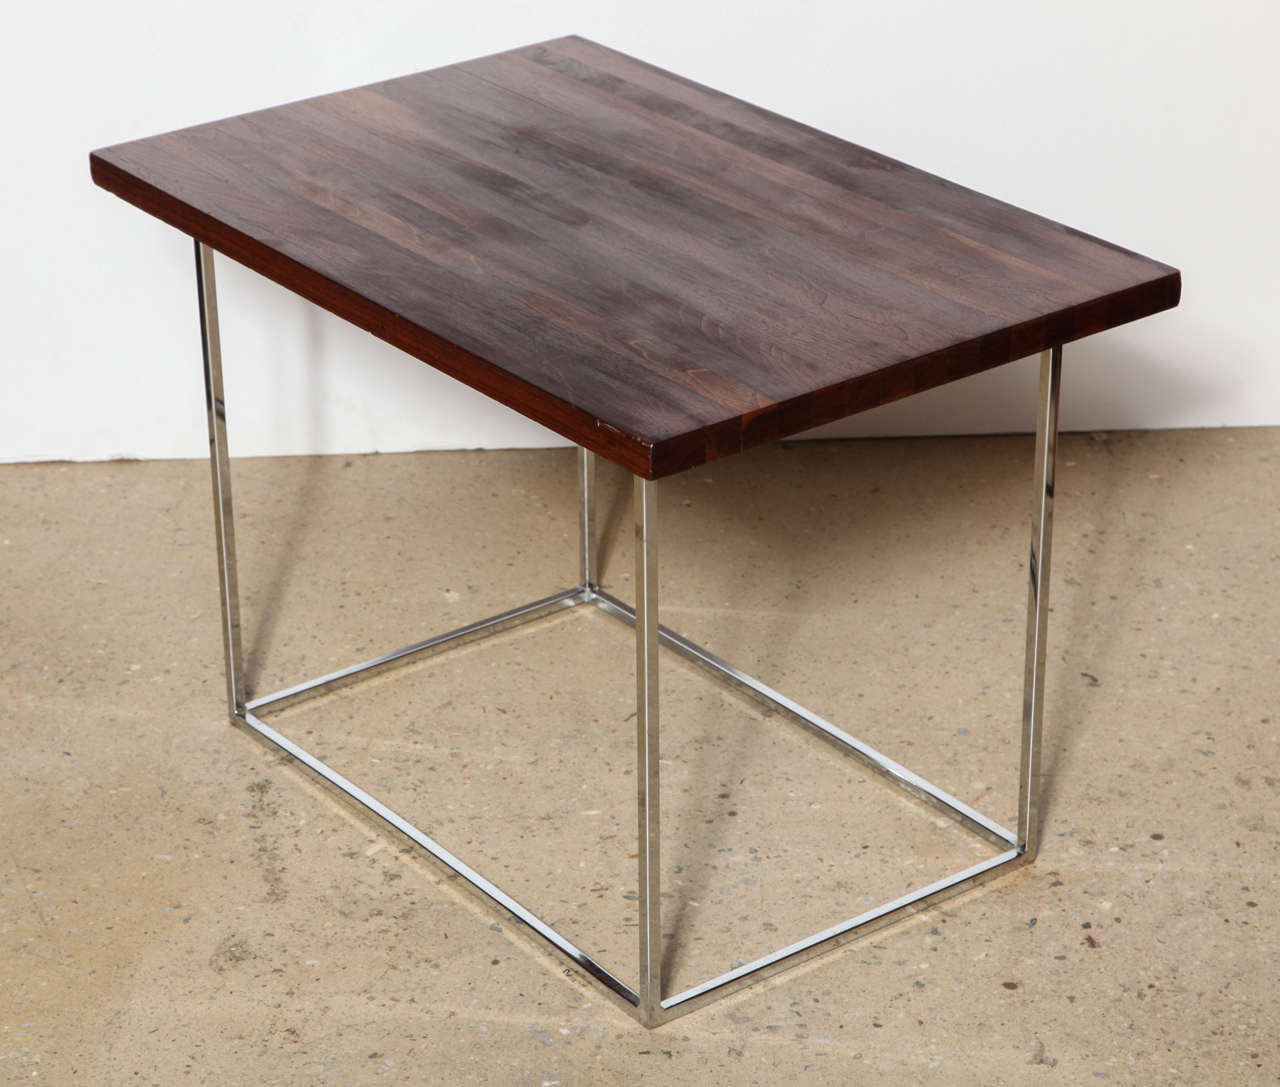 Milo Baughman for Thayer Coggin Chrome and Walnut End Table, Side Table, Nightstand, Circa 1970. Featuring an open rectangular 1.25D Chrome framework (16 x 24.5 x 19H)  with thick solid (1 1/8D) darkly finished Black Walnut surface. Versatile.